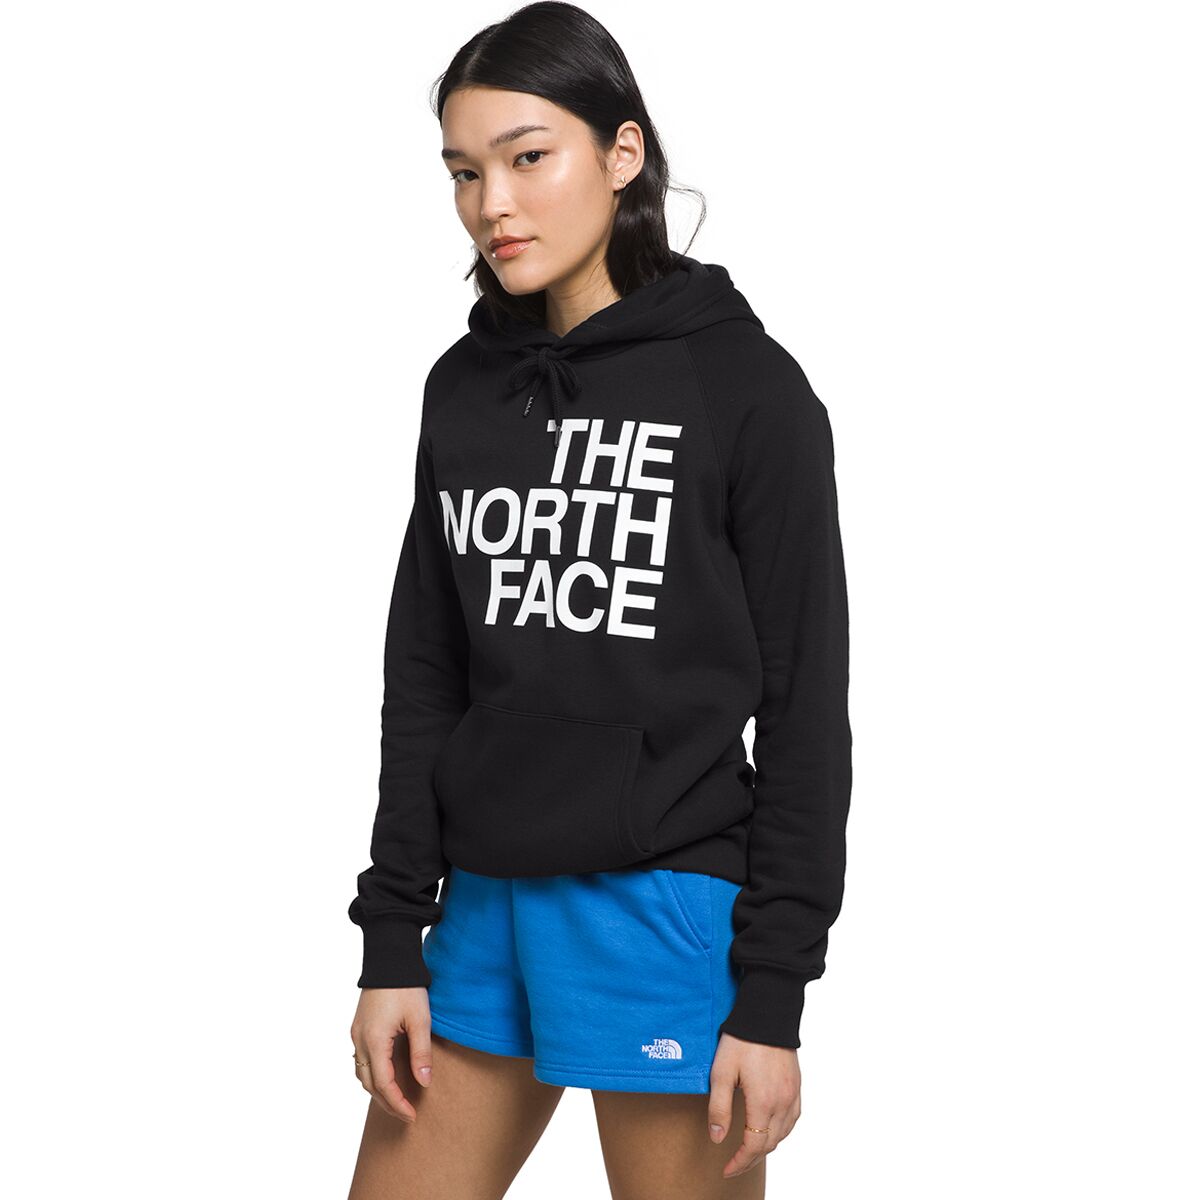 The North Face Brand Proud Hoodie - Women's